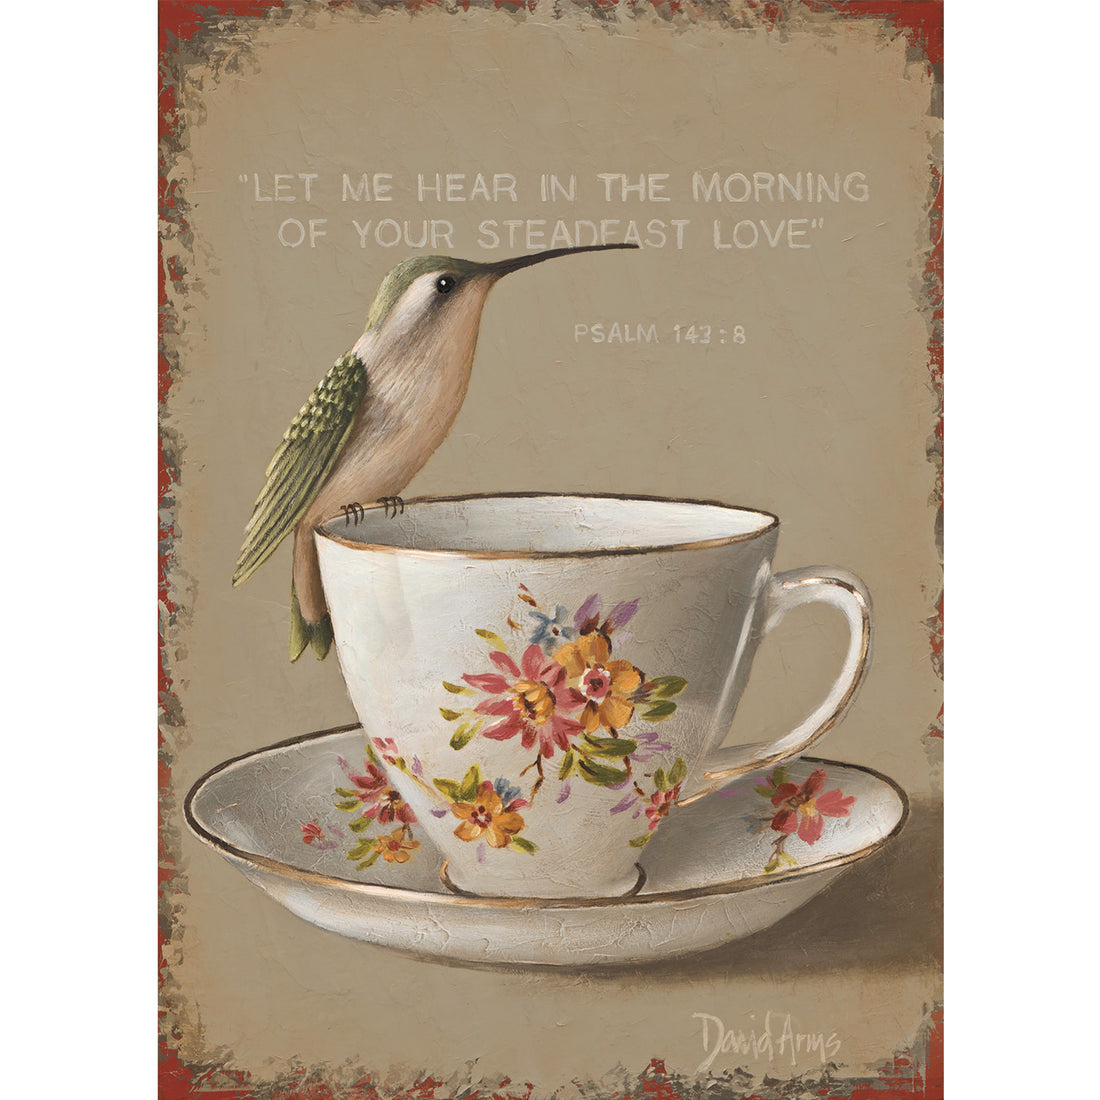 An illustration of a white and green hummingbird resting on the edge of a floral teacup on a beige background, with Bible quote &quot;Psalm 143:8&quot; printed above the bird.